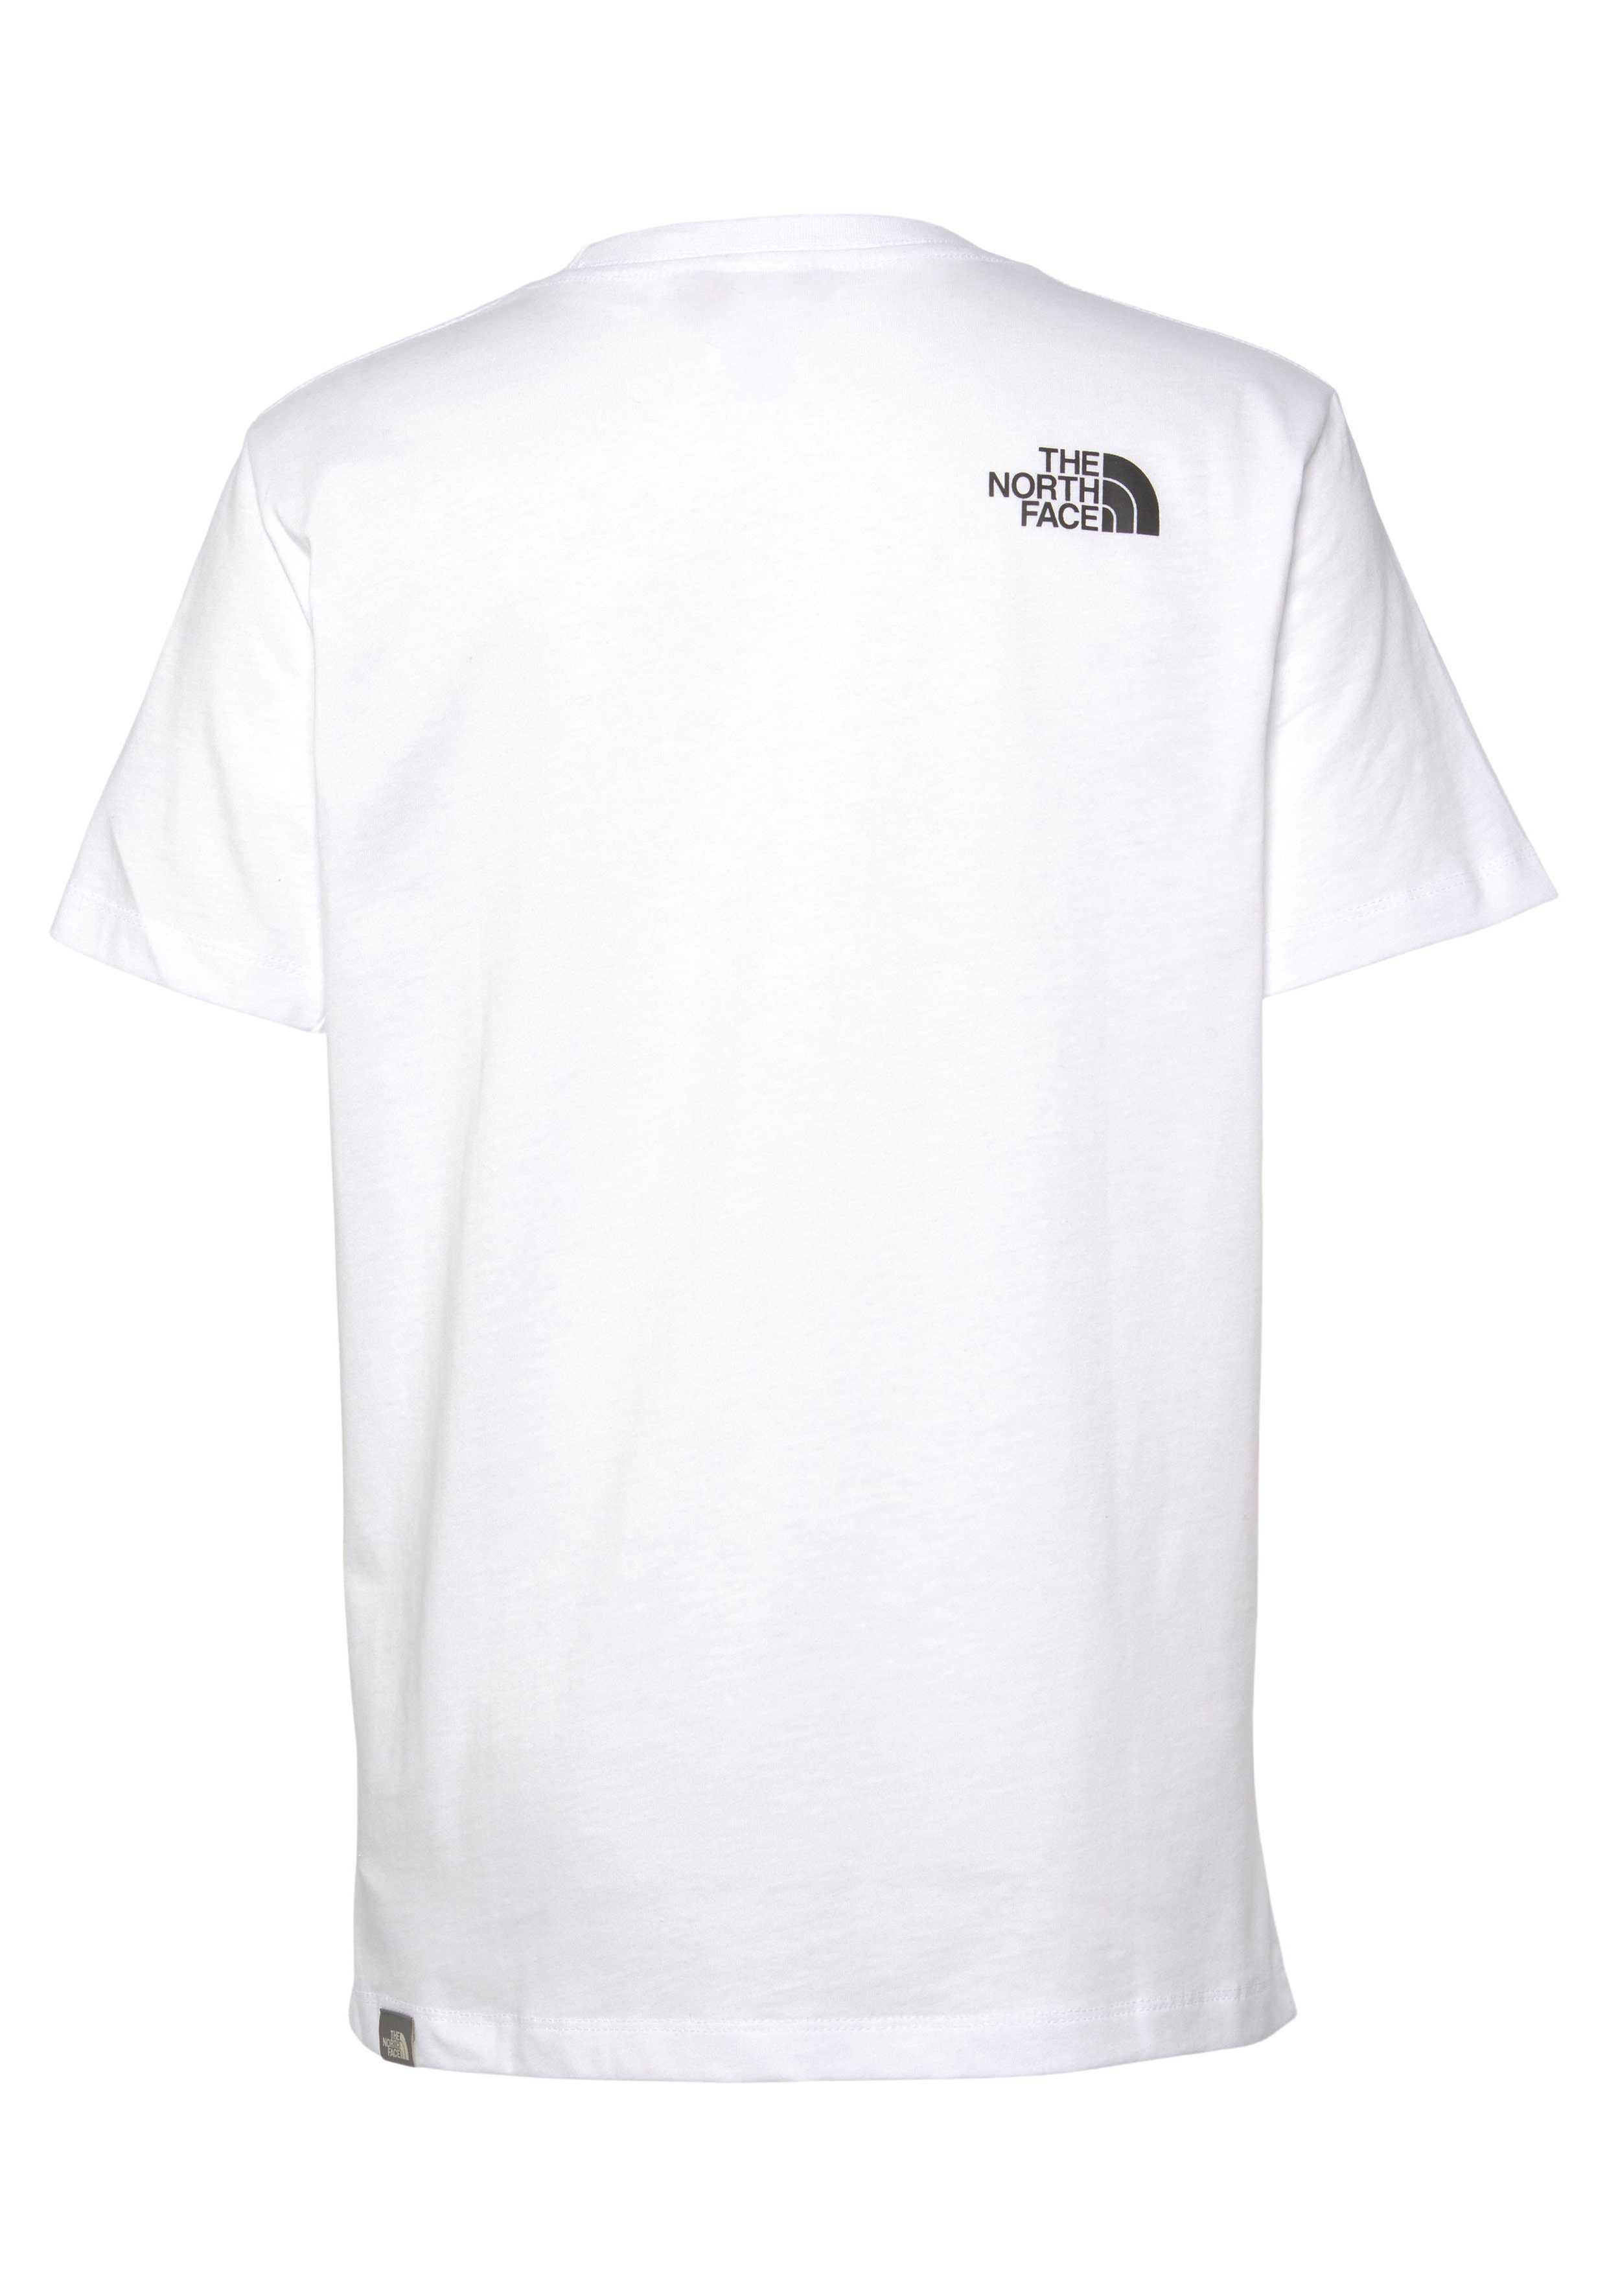 T-Shirt Kinder TEE für The white - North Face EASY